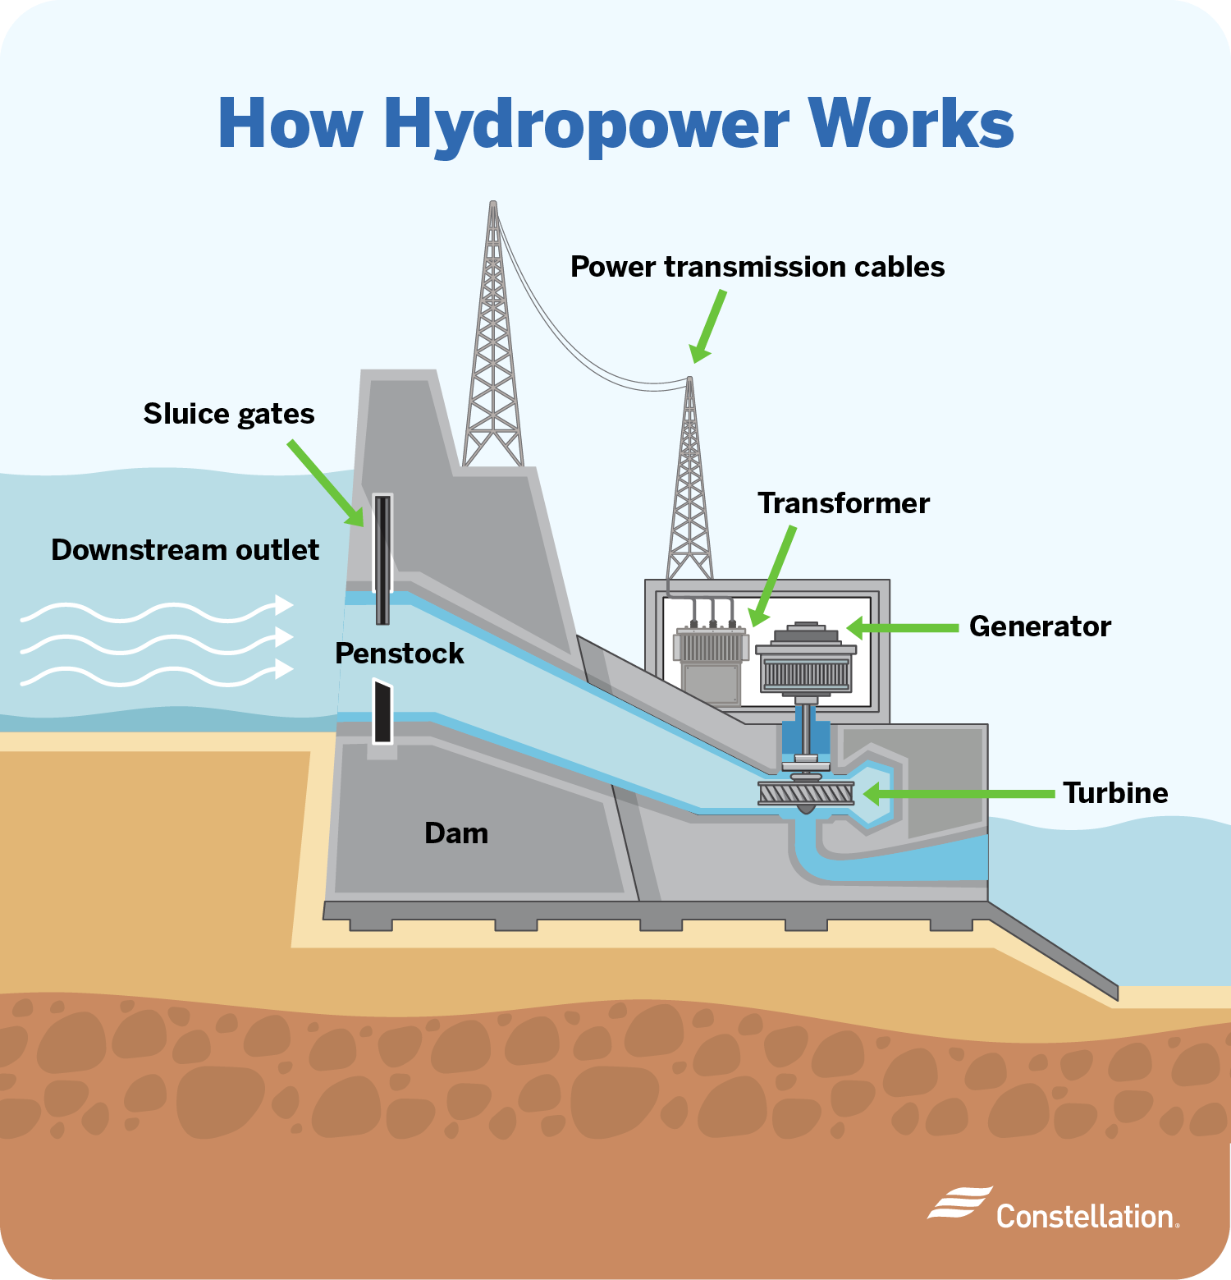 How does hydropower work?